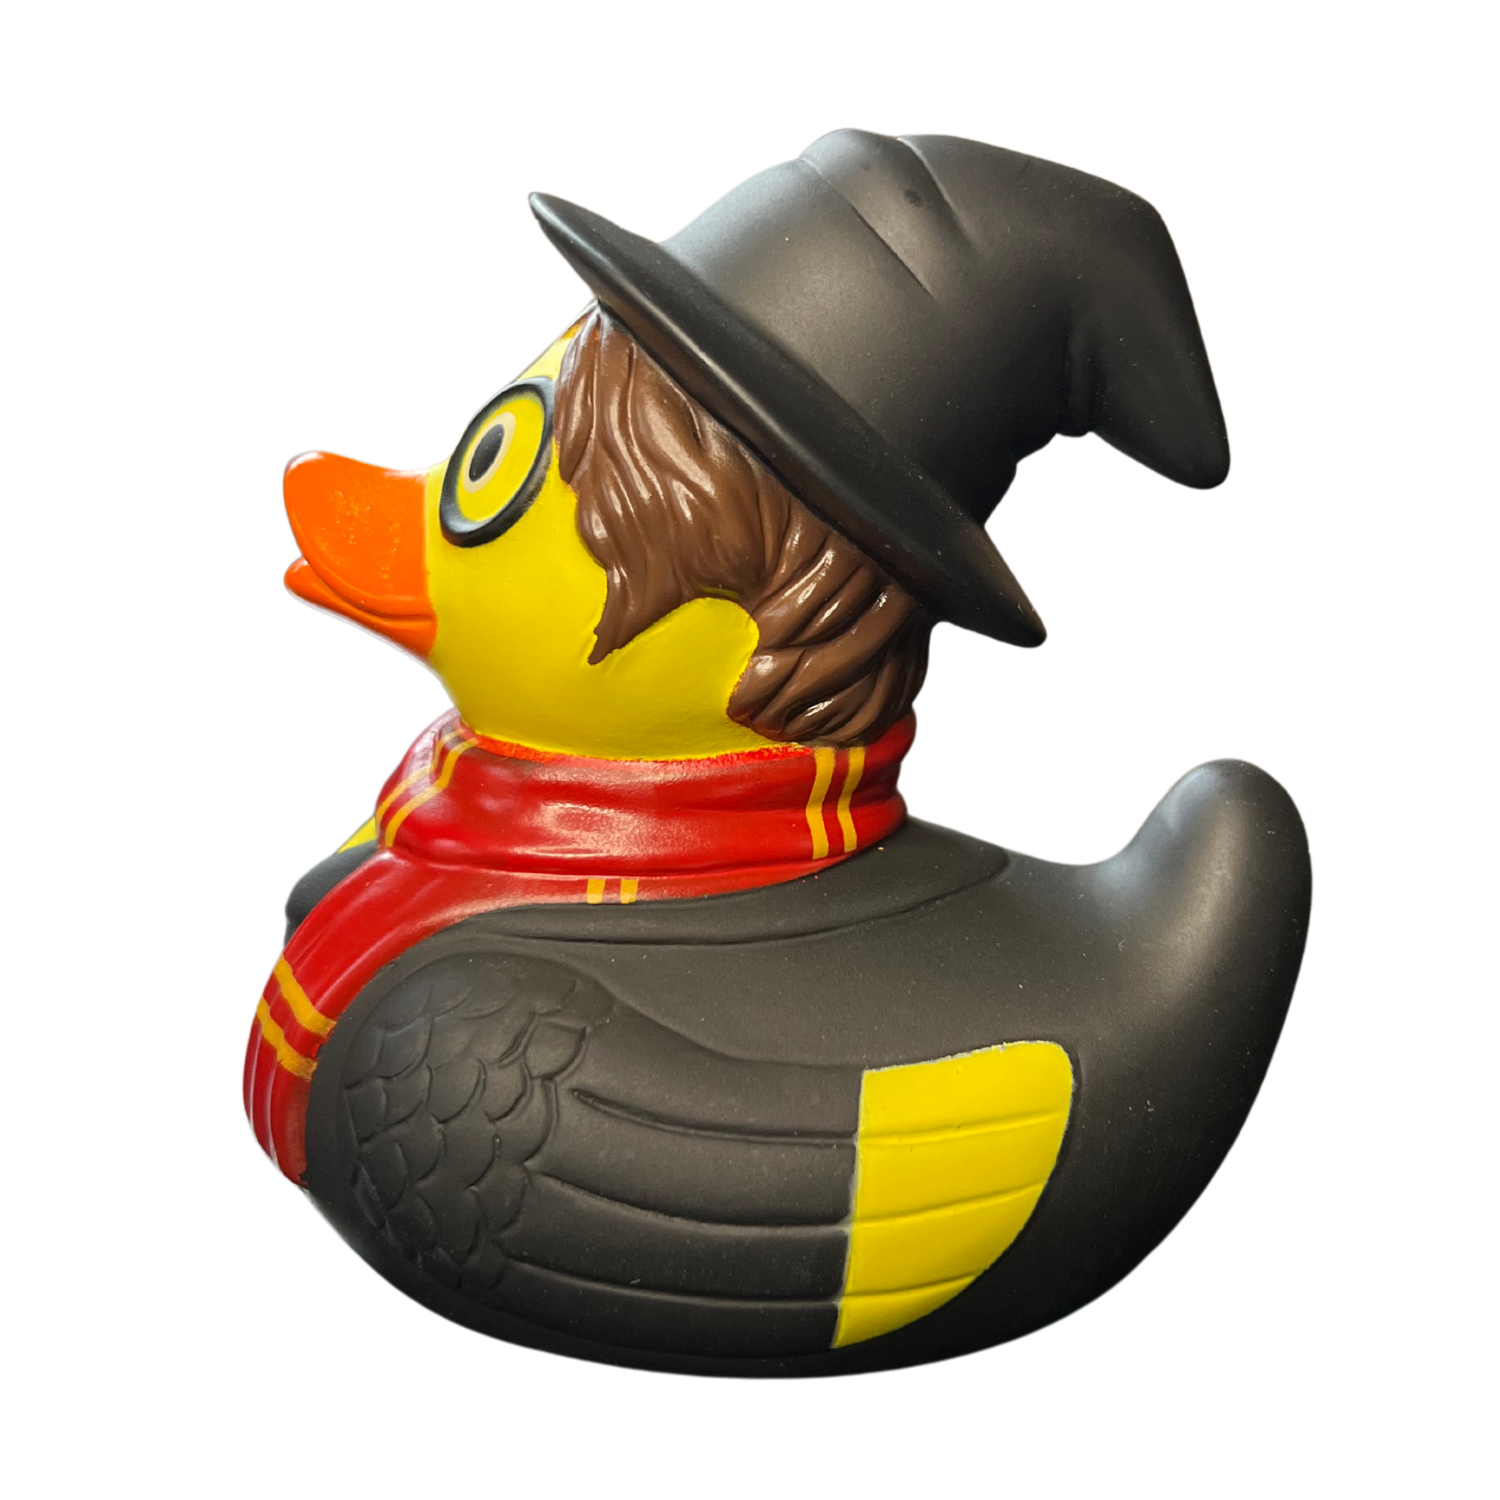 Wizard Rubber Duck Left Side View